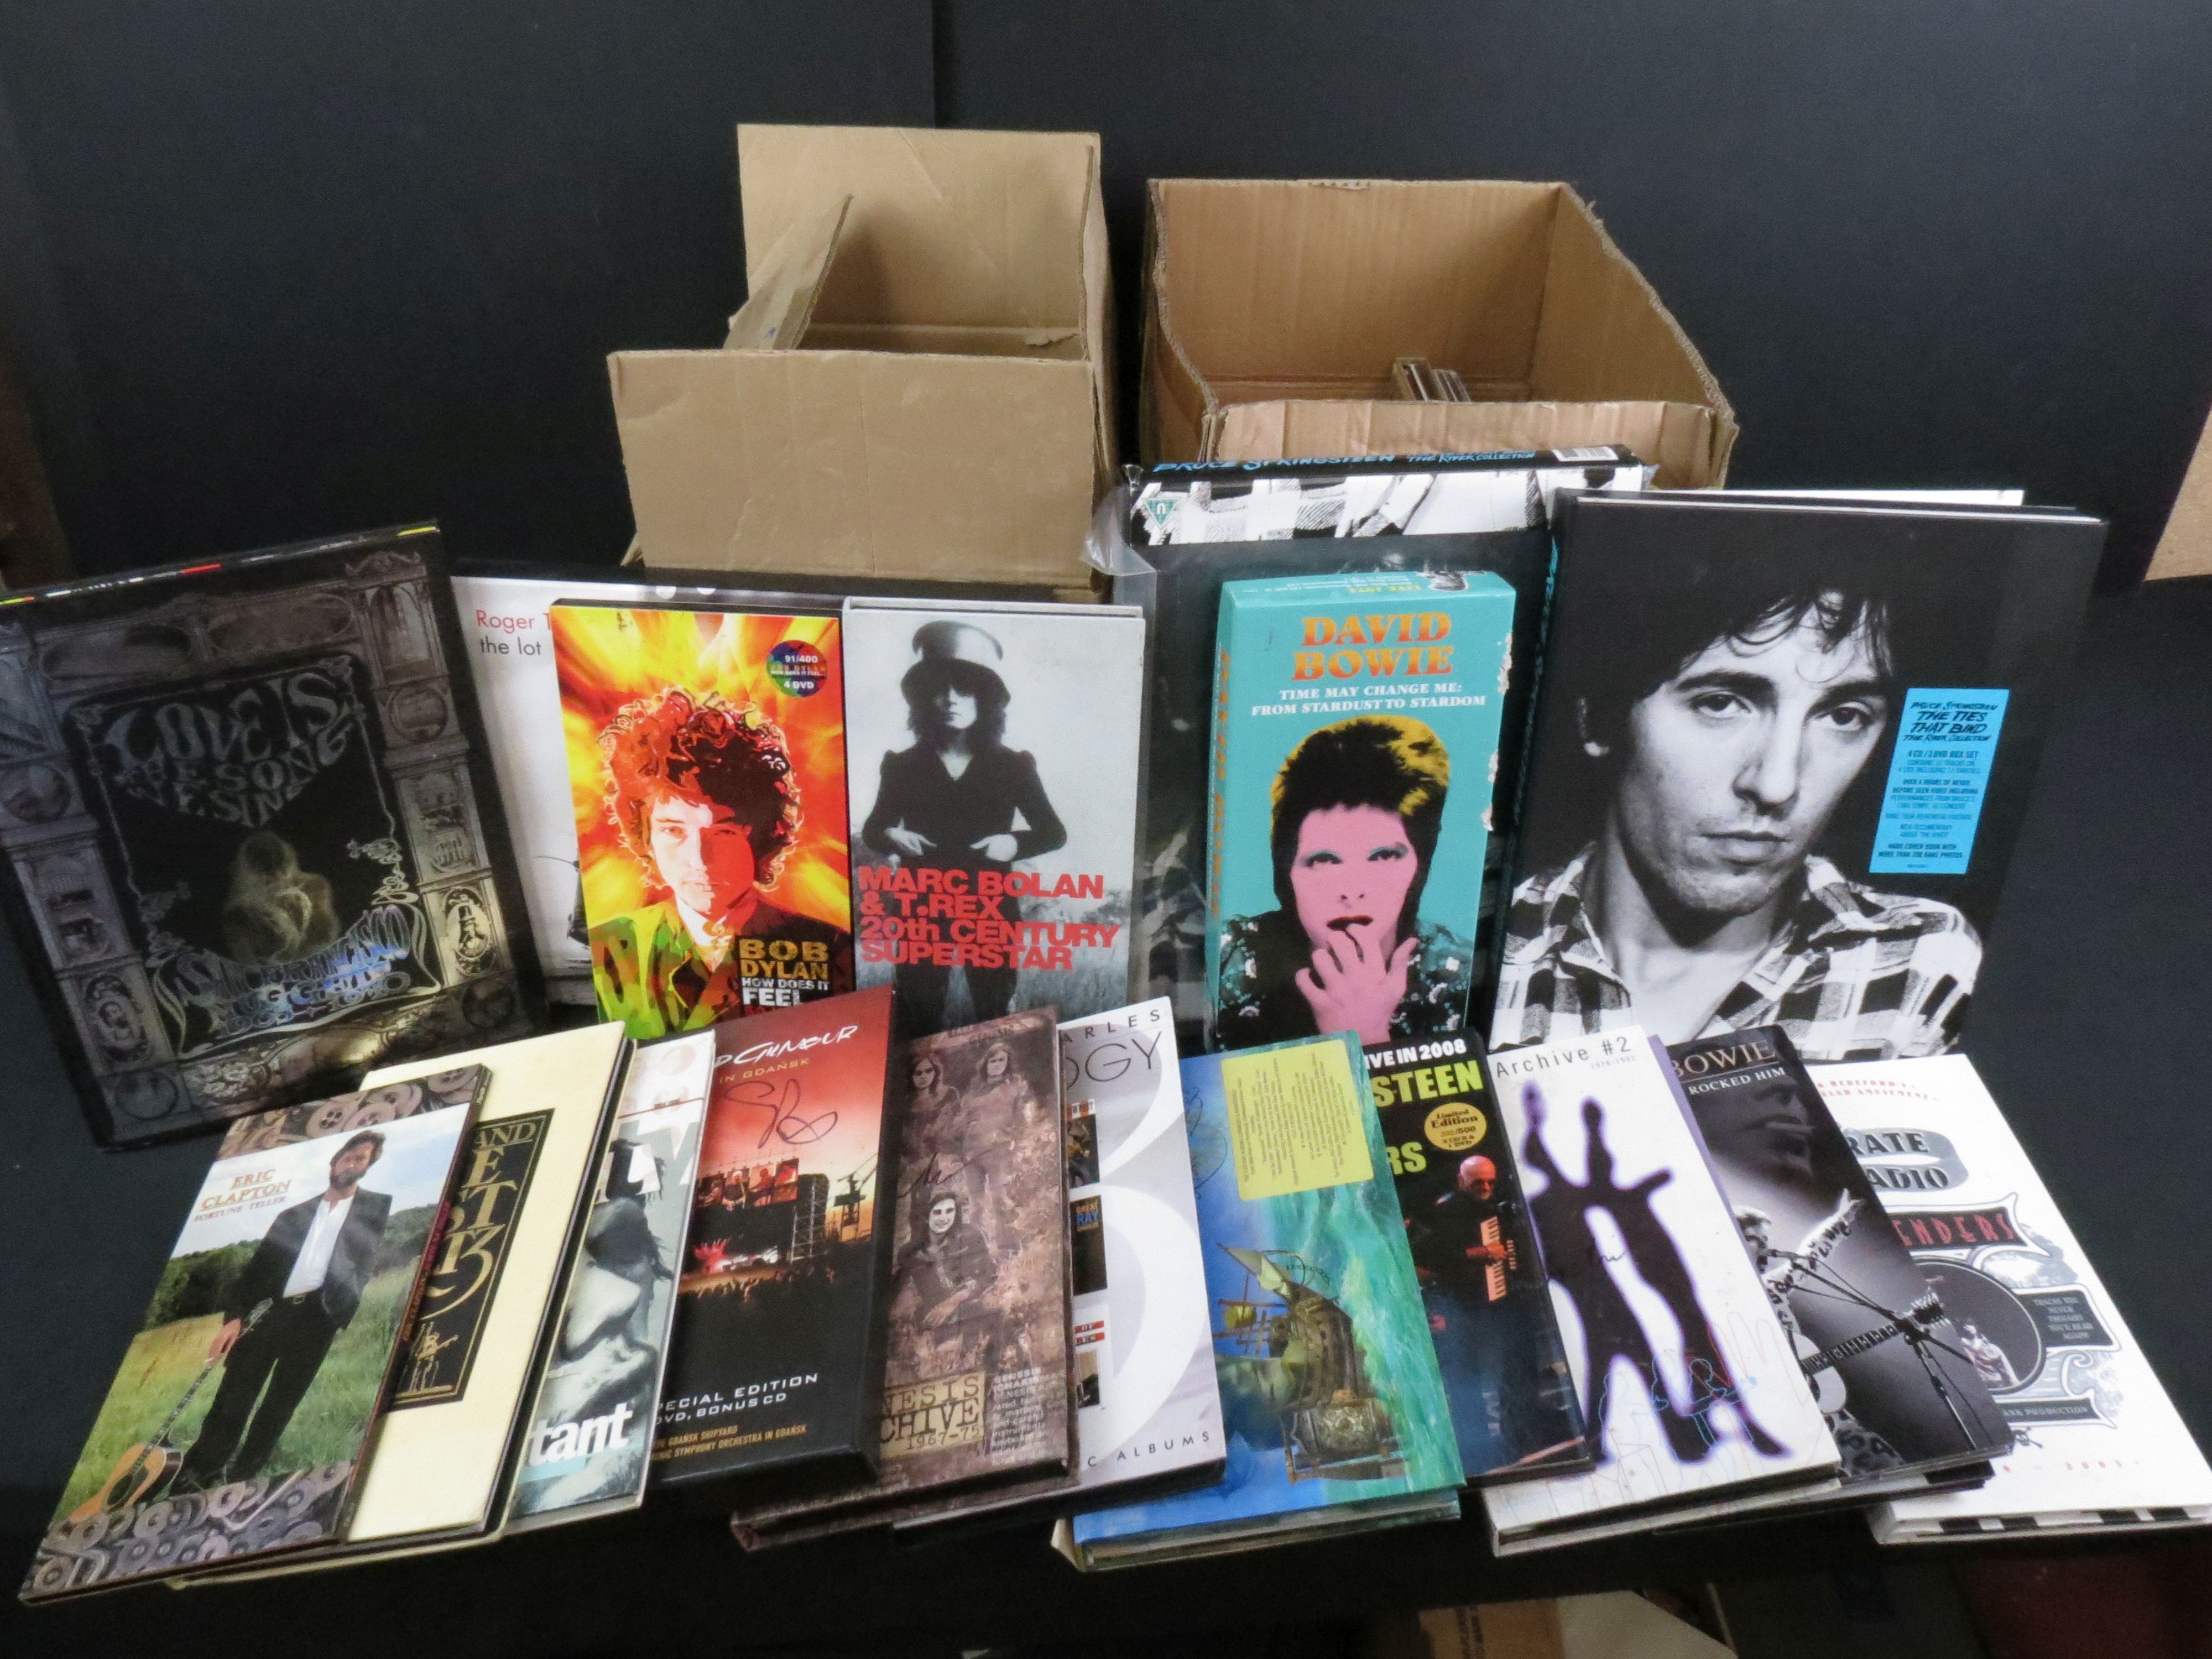 CDs / DVDs - Around 32 box sets to include Bruce Springsteen, David Bowie, T Rex, Bob Dylan, Roger